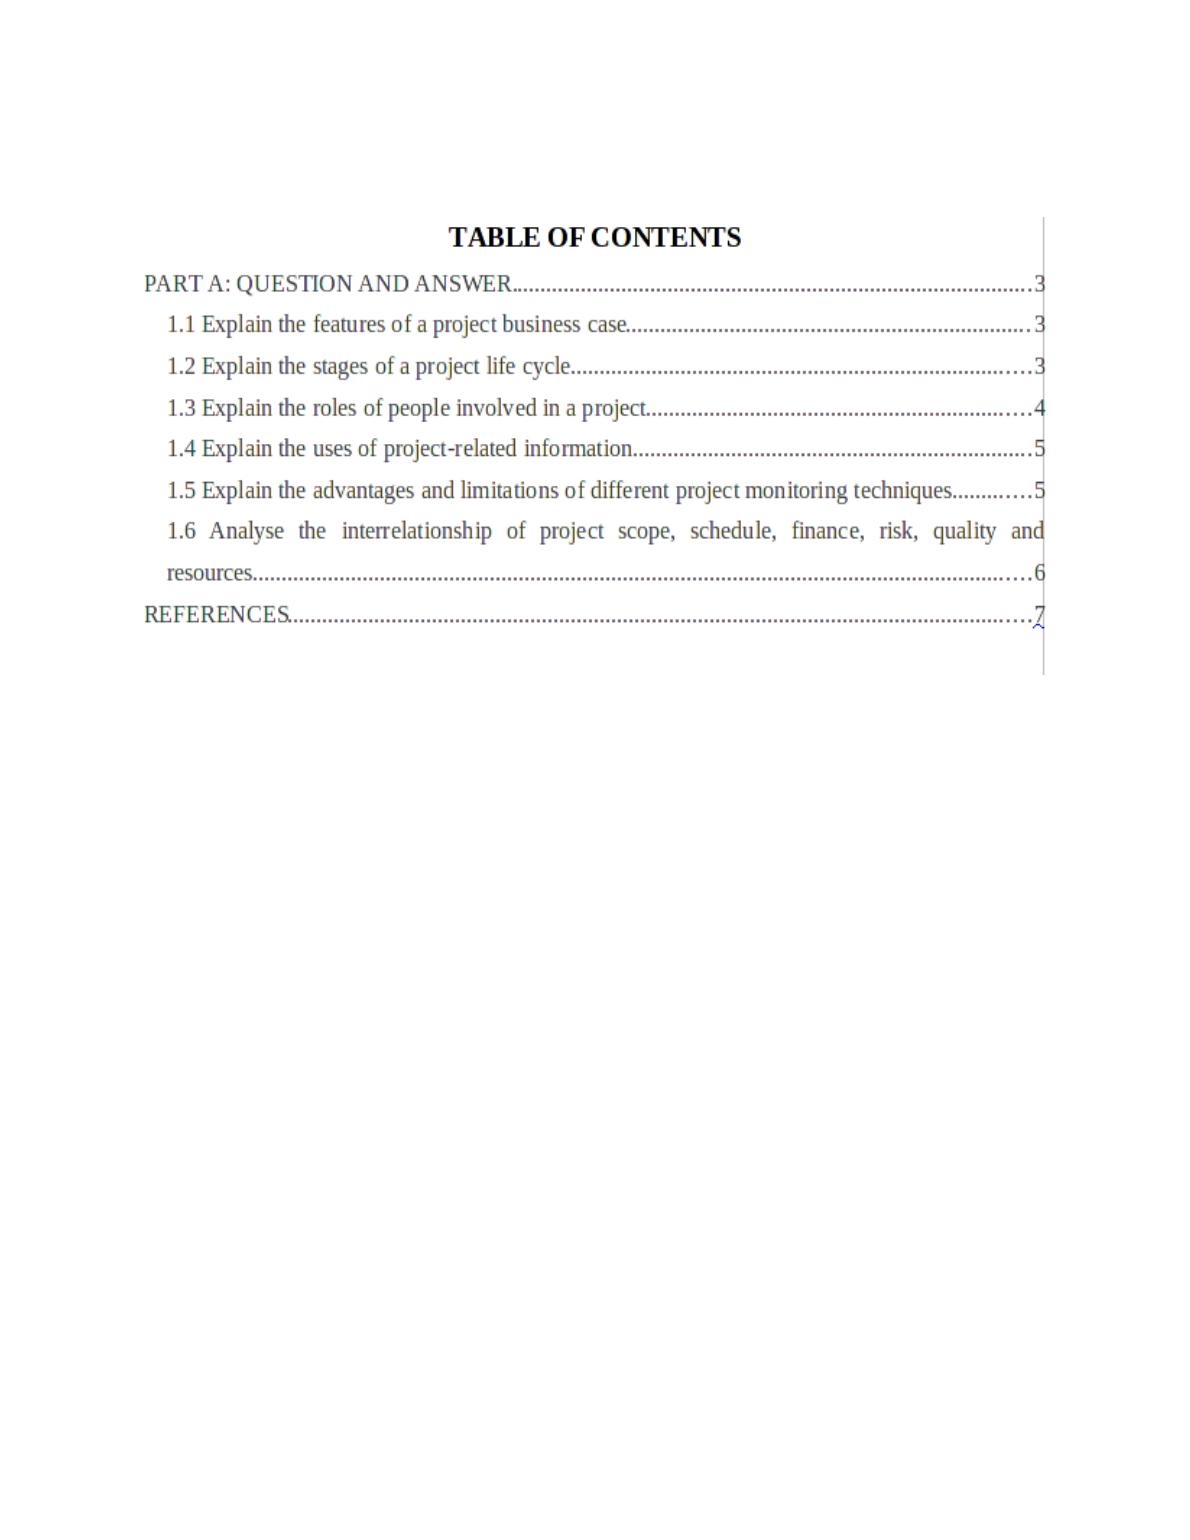 Project Business Case Assignment PDF_2